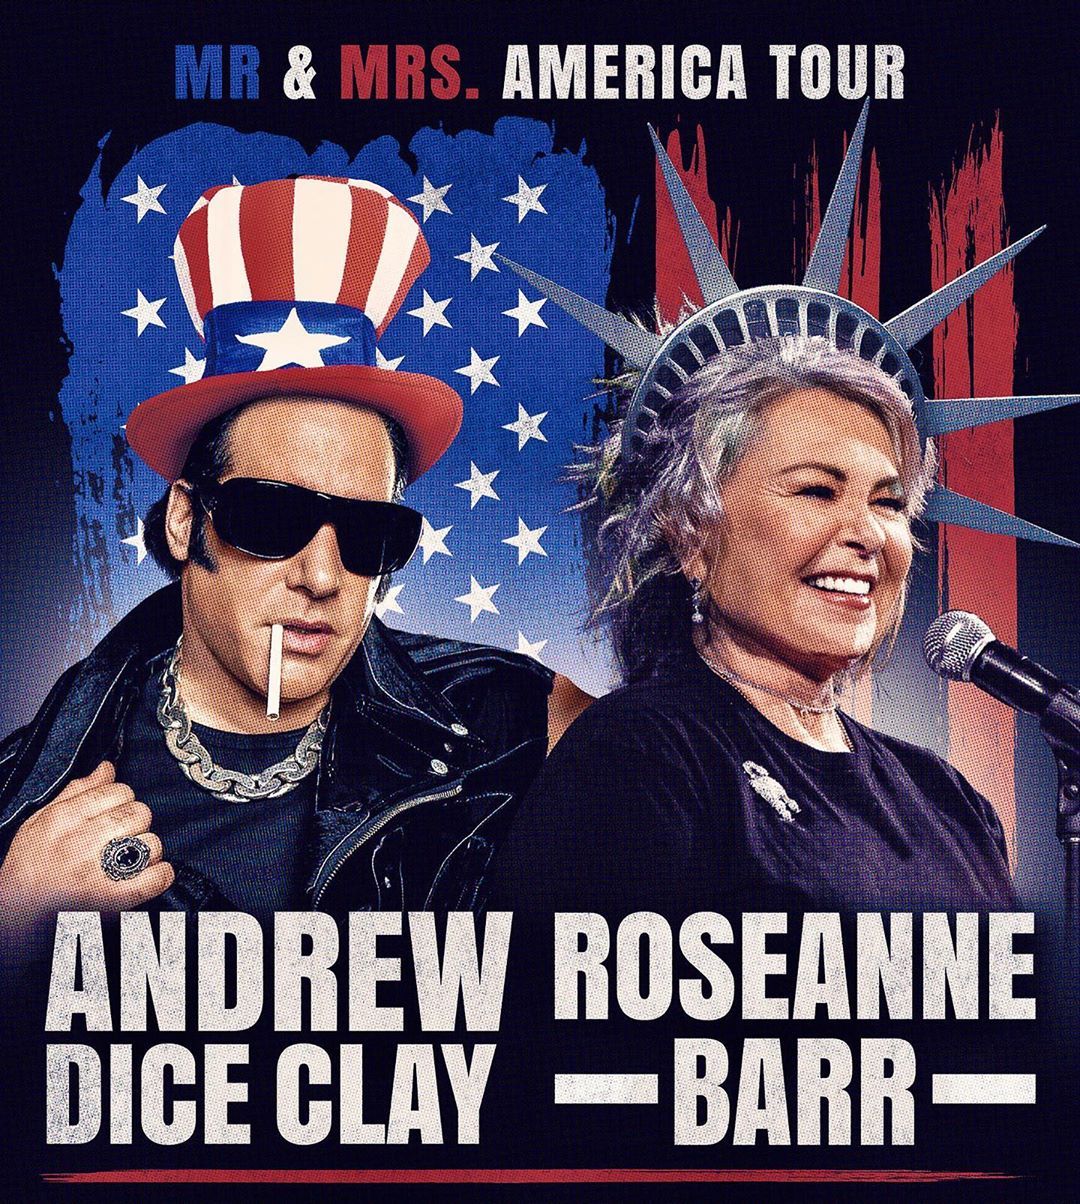 Andrew Dice Clay and Roseanne Barr in Mr. And Mrs. America comedy tour poster